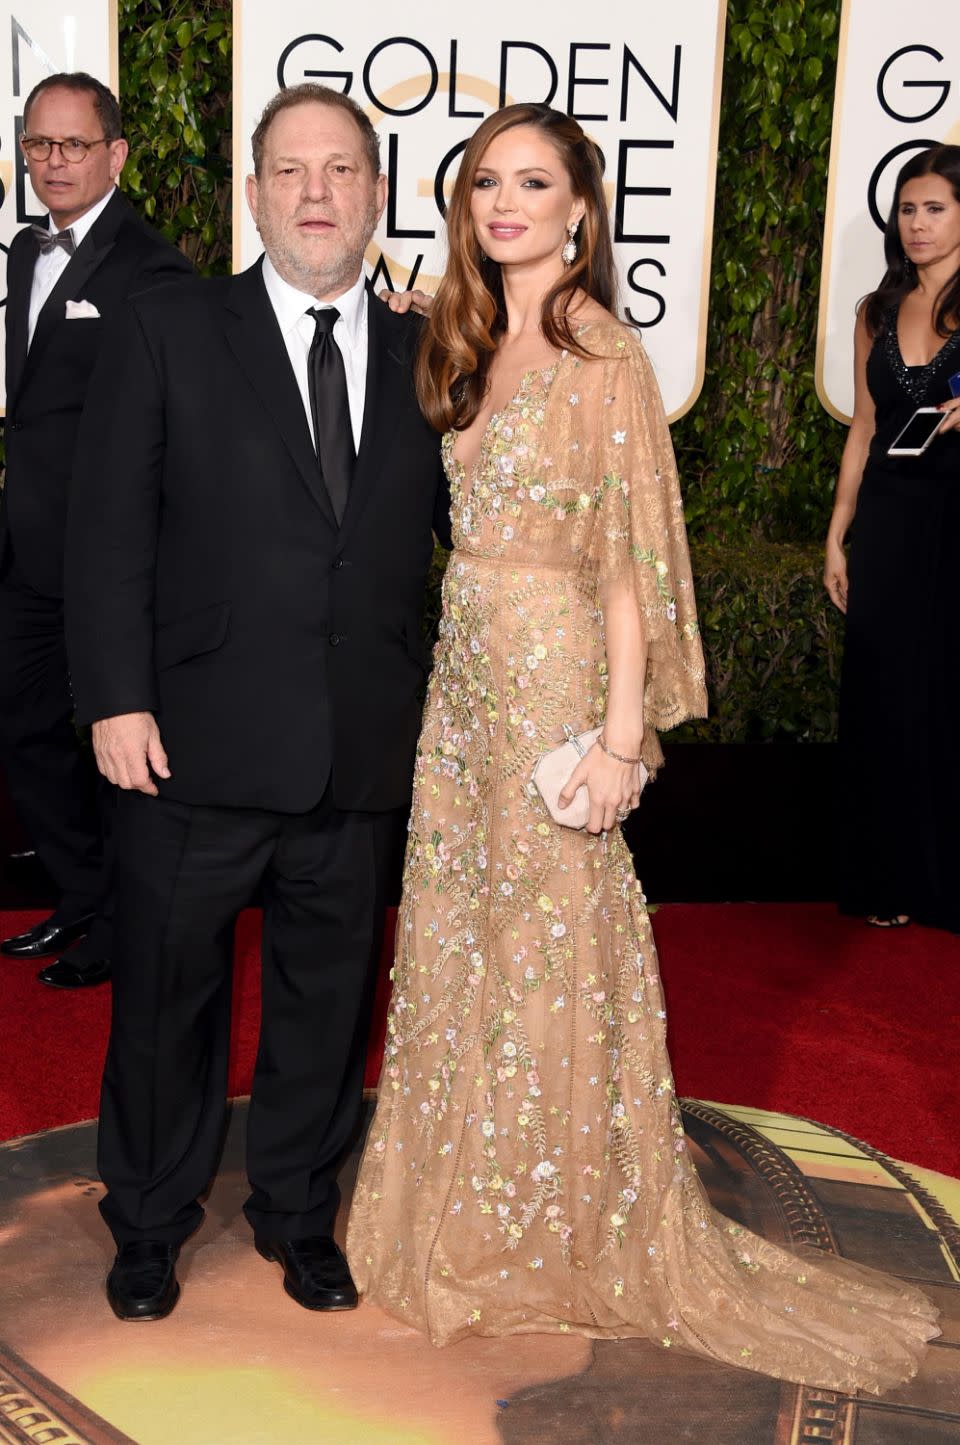 Harvey Weinstein is pictured with his wife, Marchesa, who is the founder of fashion label Marchesa. Photo: Getty Images